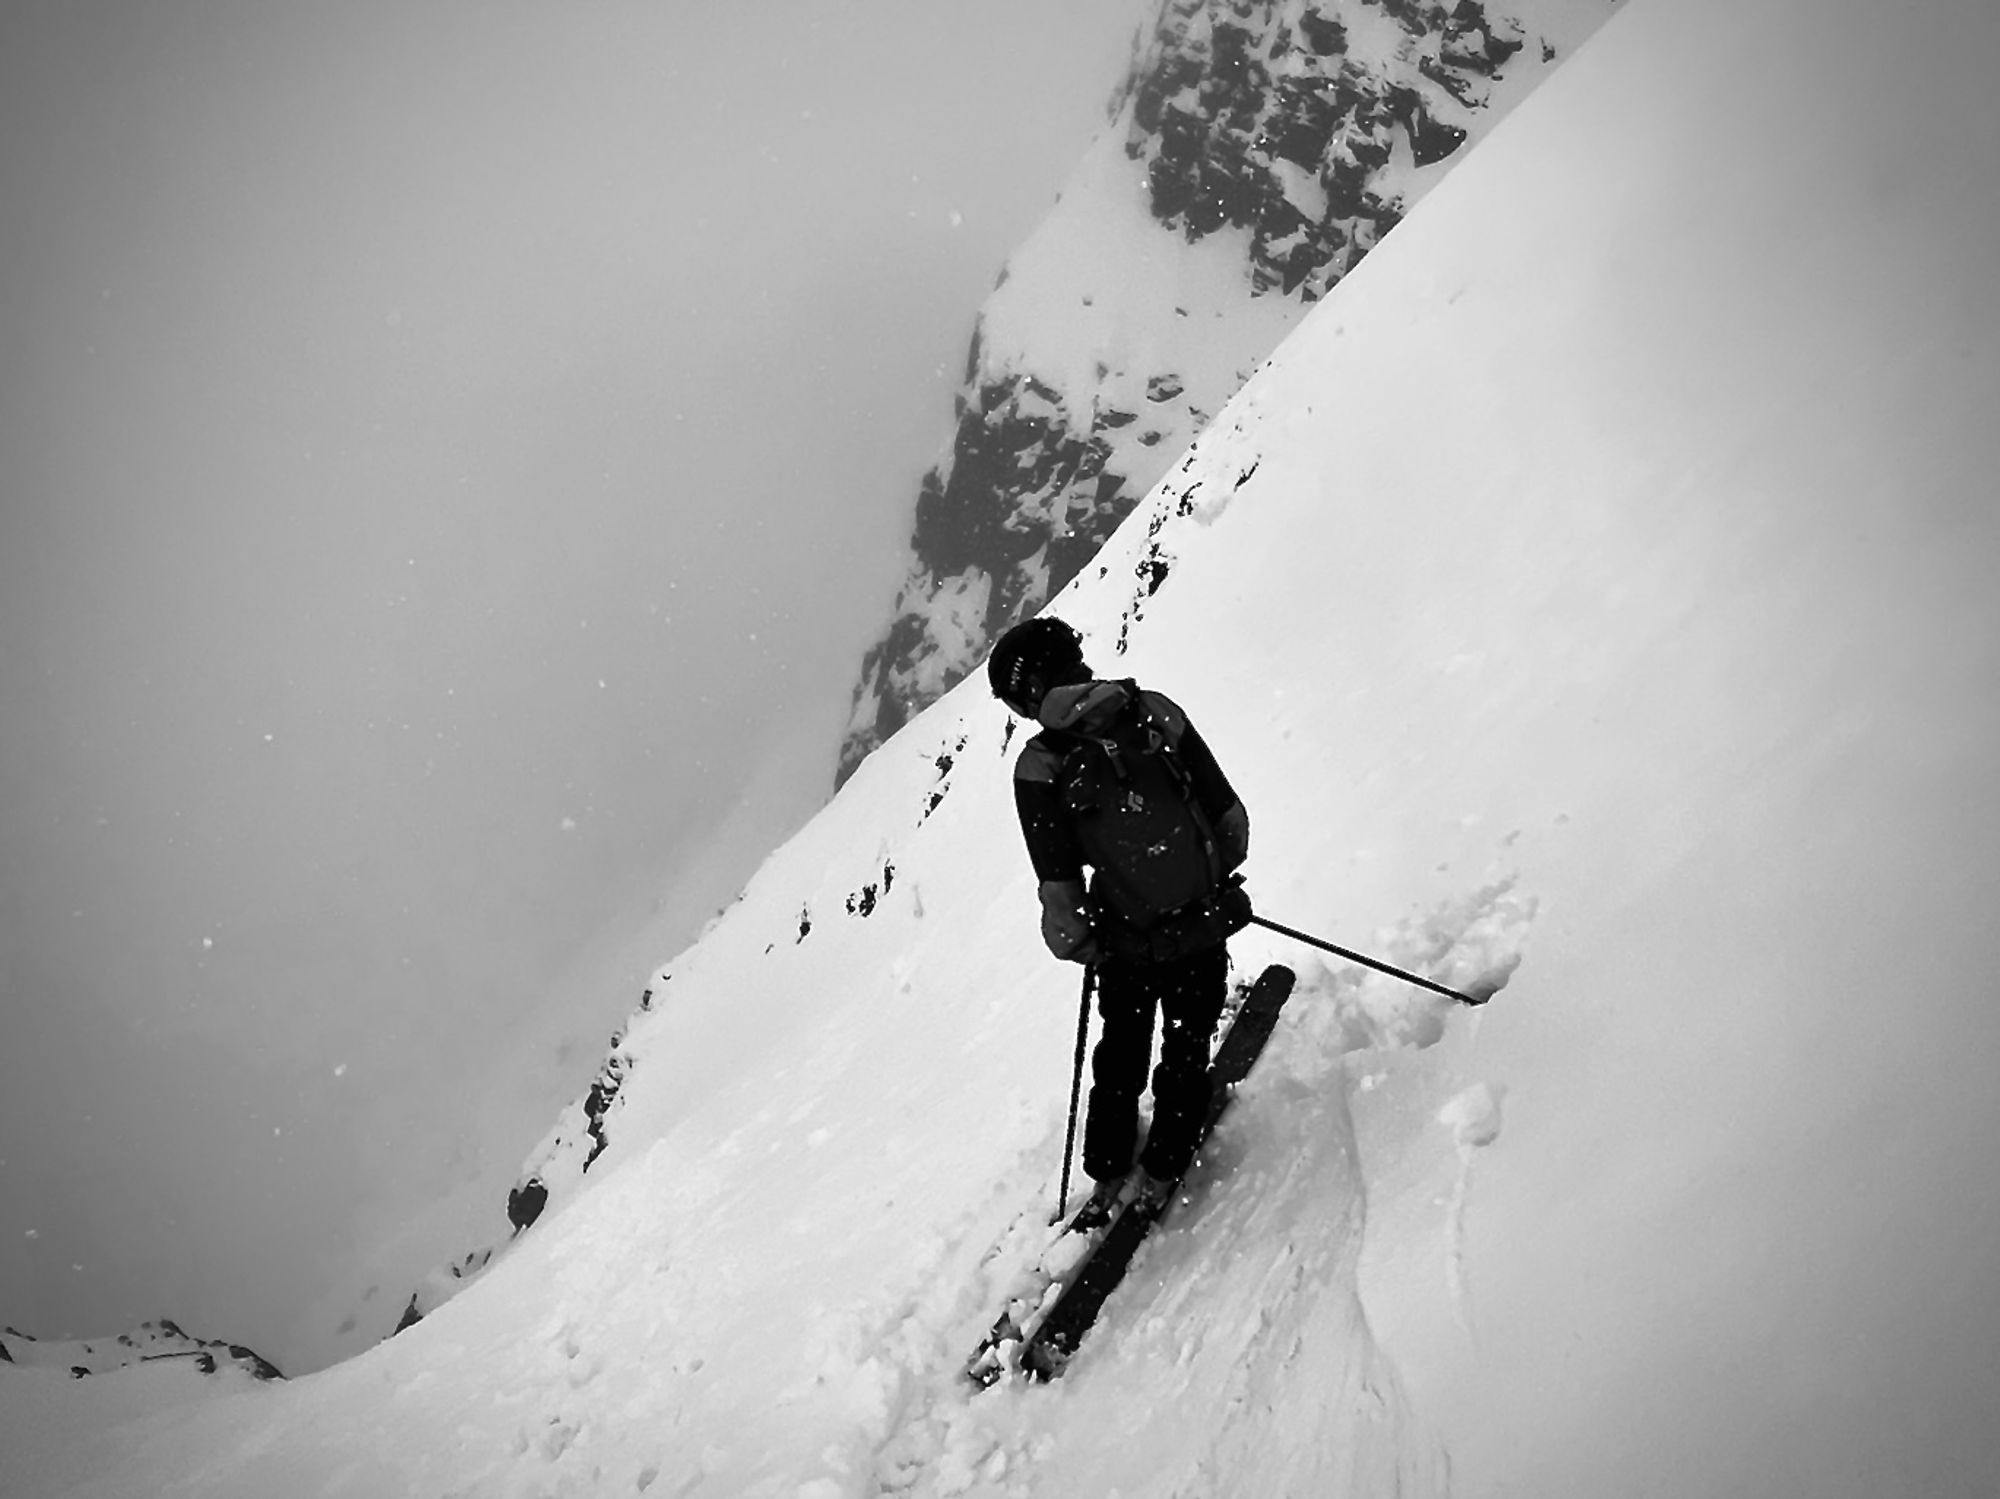 A skier looking into the clouds below him